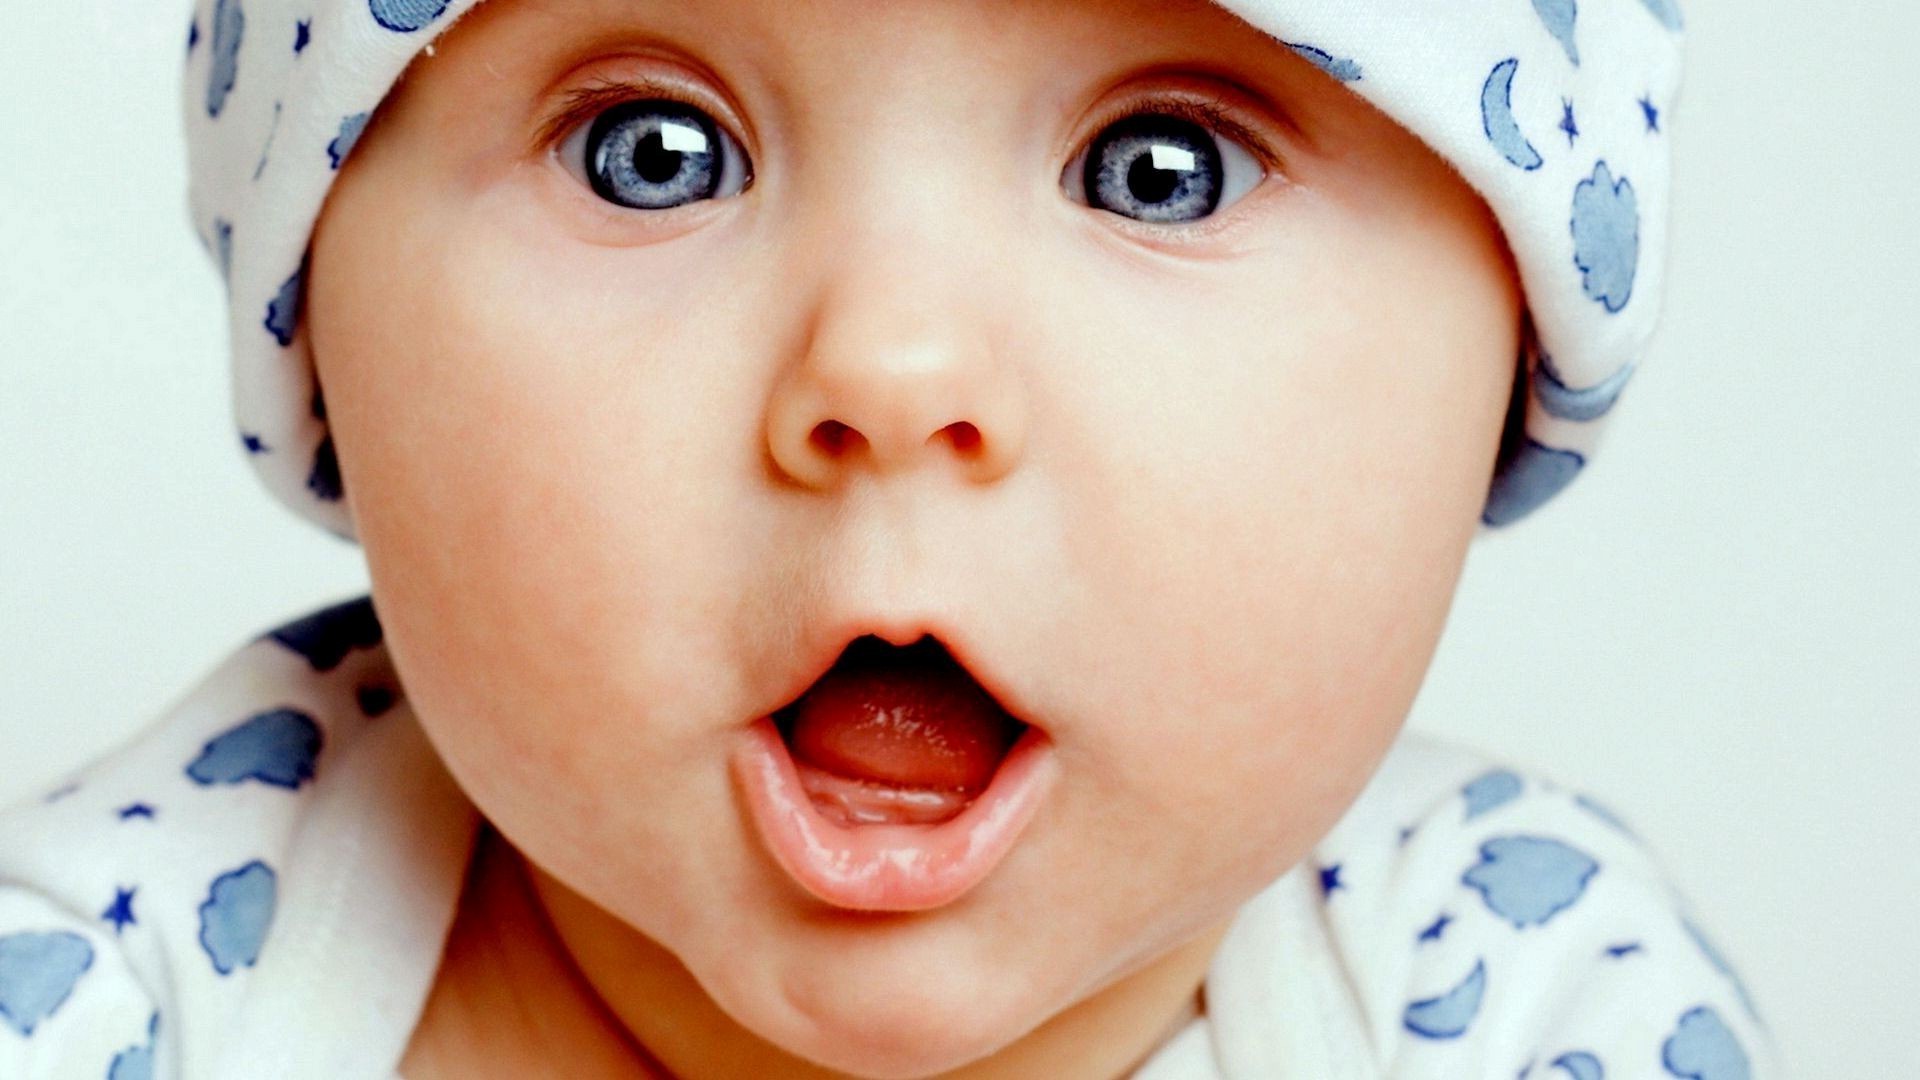 1920x1080 Cute Baby Wallpapers For Desktop Free Download Group (74+)